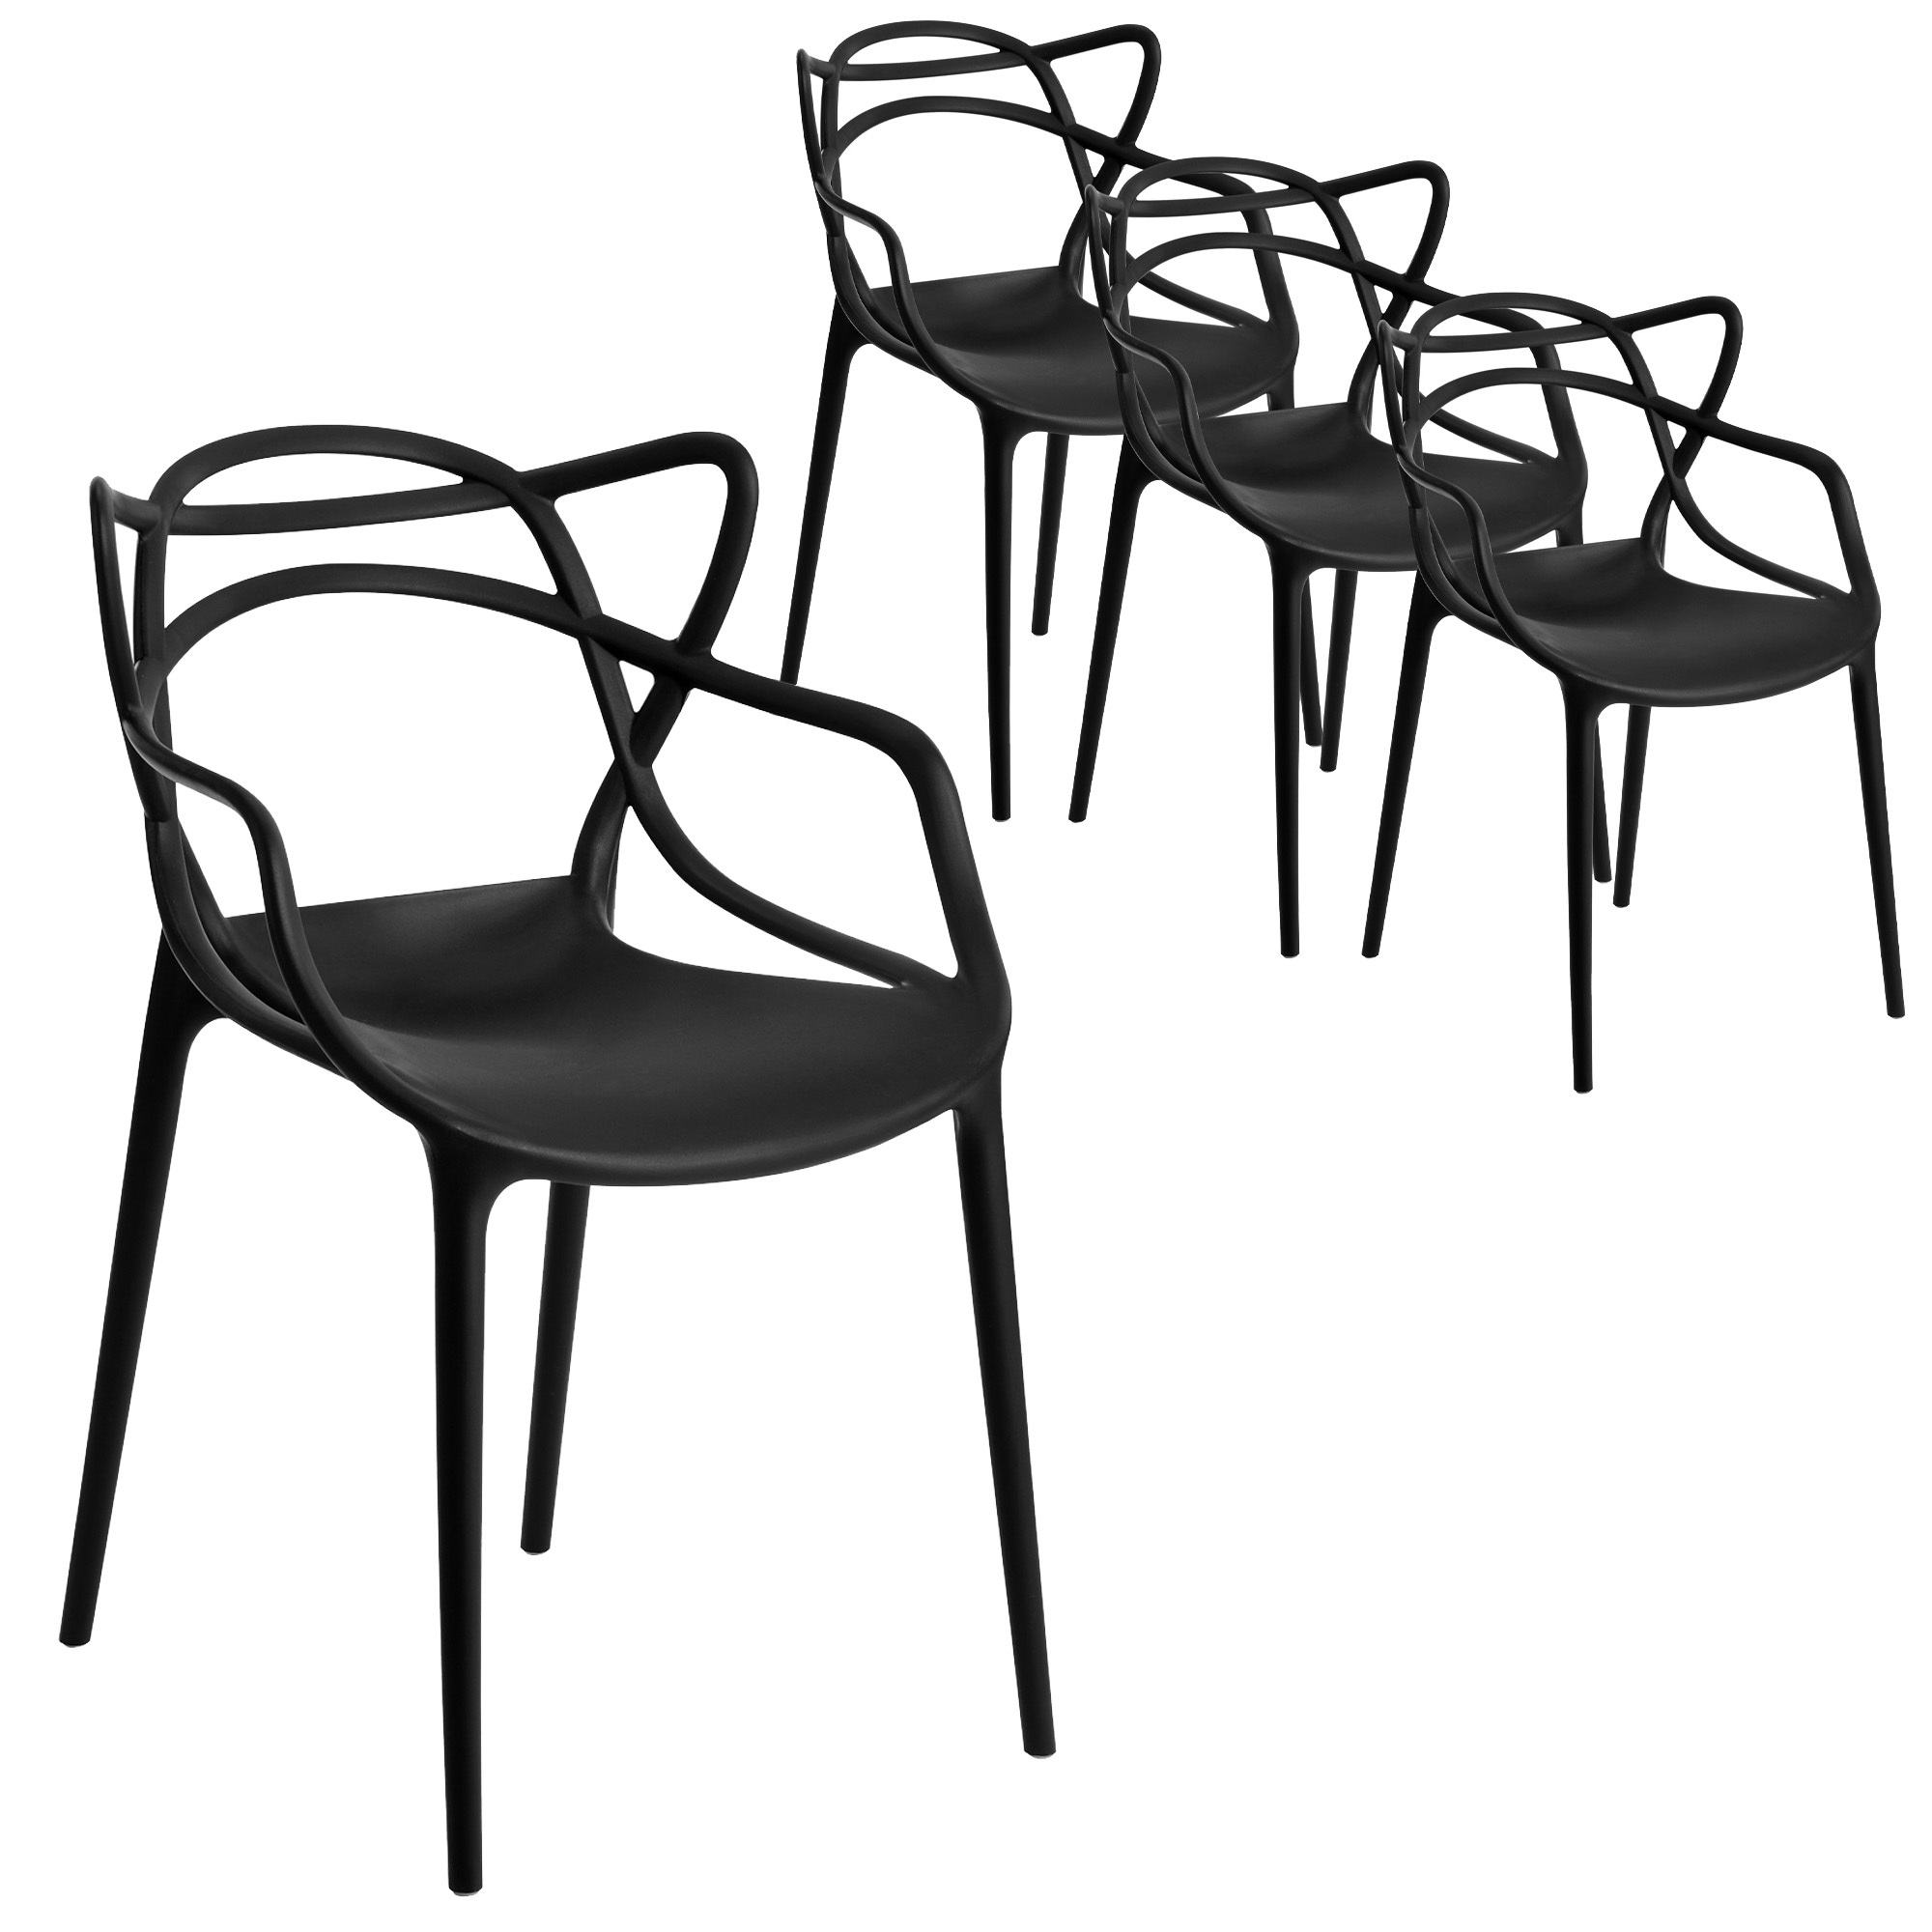 Temple Webster Lola Uv Stabilised, Black Plastic Stackable Outdoor Chairs